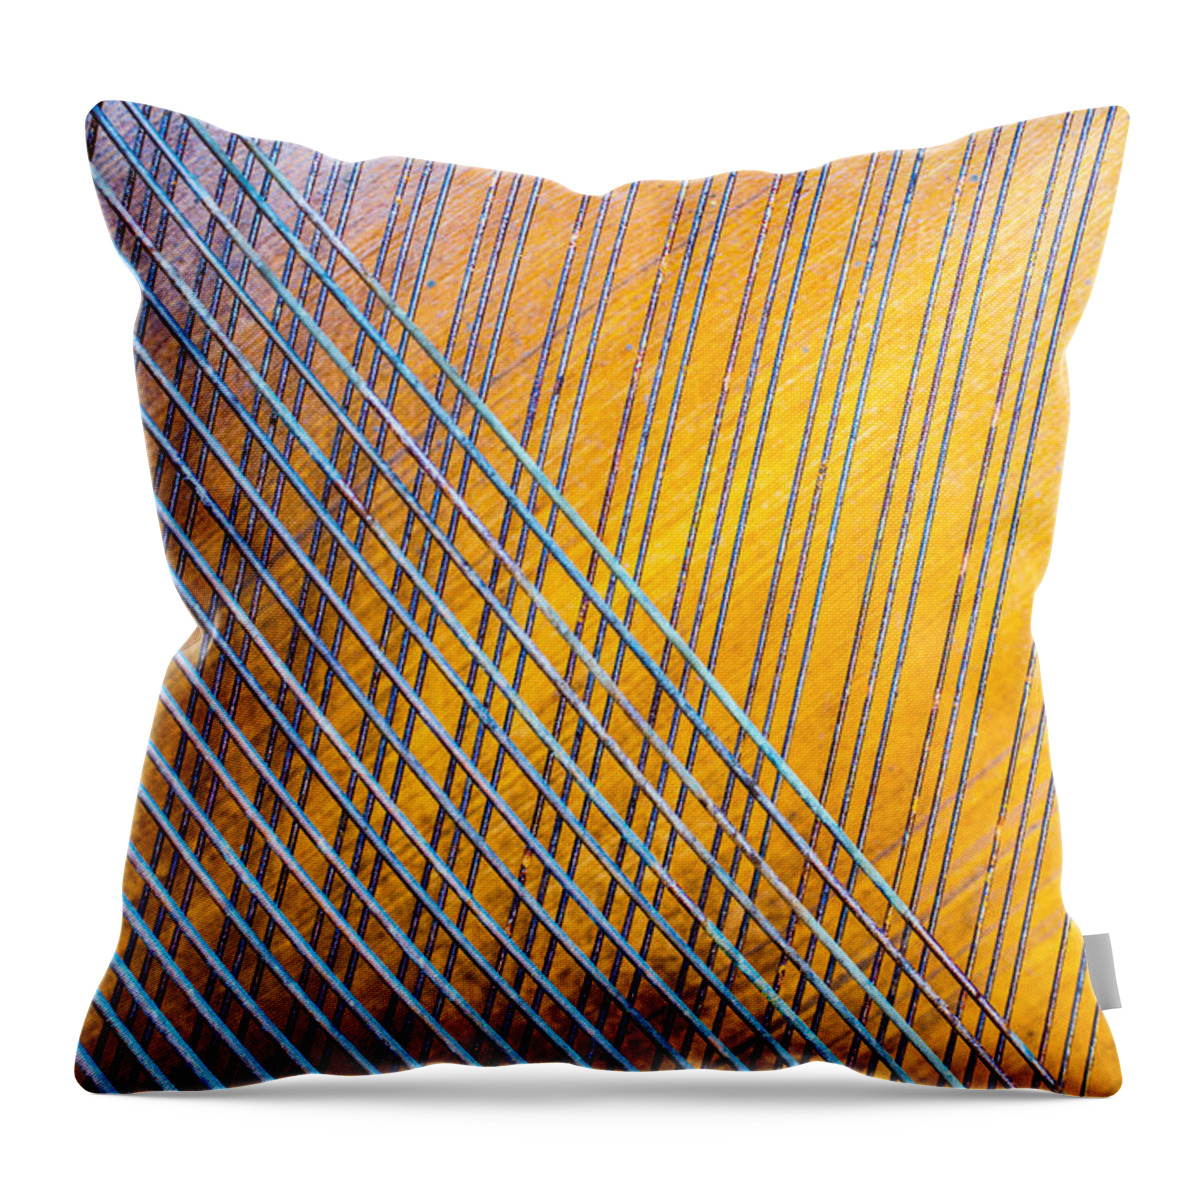 Piano Throw Pillow featuring the photograph Piano Strings by David Downs